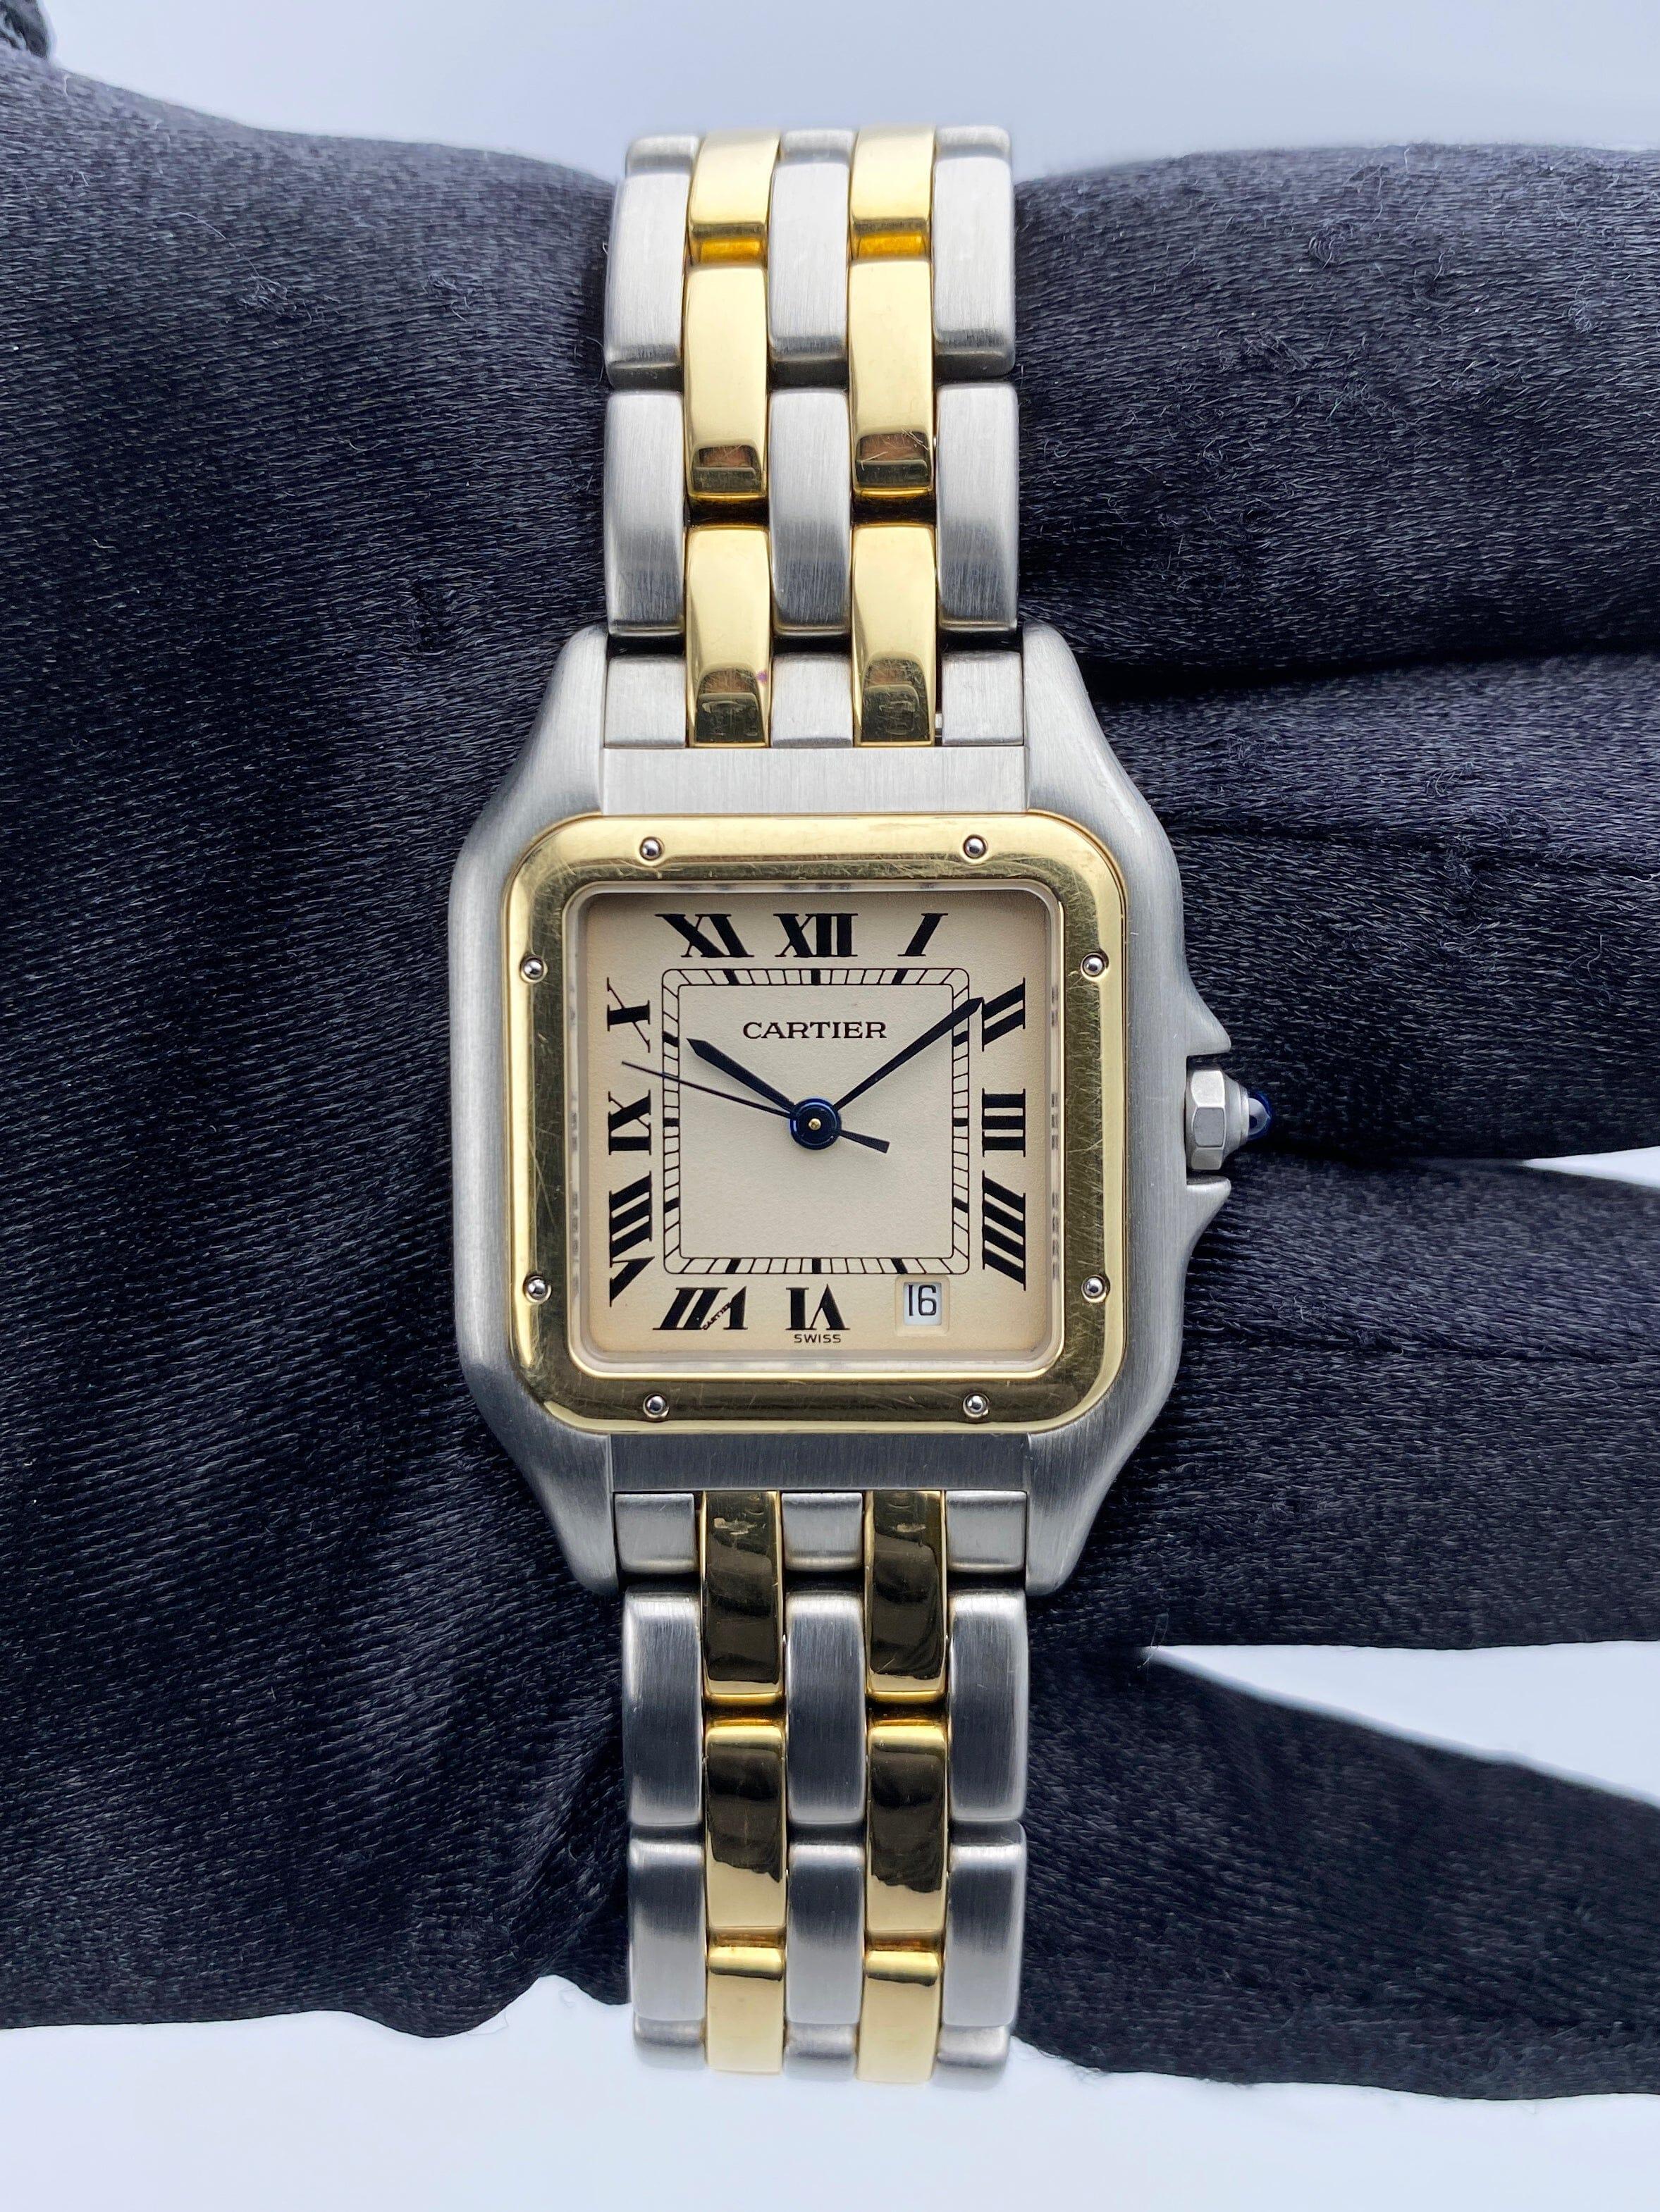 Cartier Panthere Midsize 183949 Ladies Watch. 27mm stainless steel case. 18K yellow gold fixed bezel. Off-White dial with blue steel hands and Roman numeral hour markers. Minute markers on the inner dial. Date display at the 5 o'clock position.